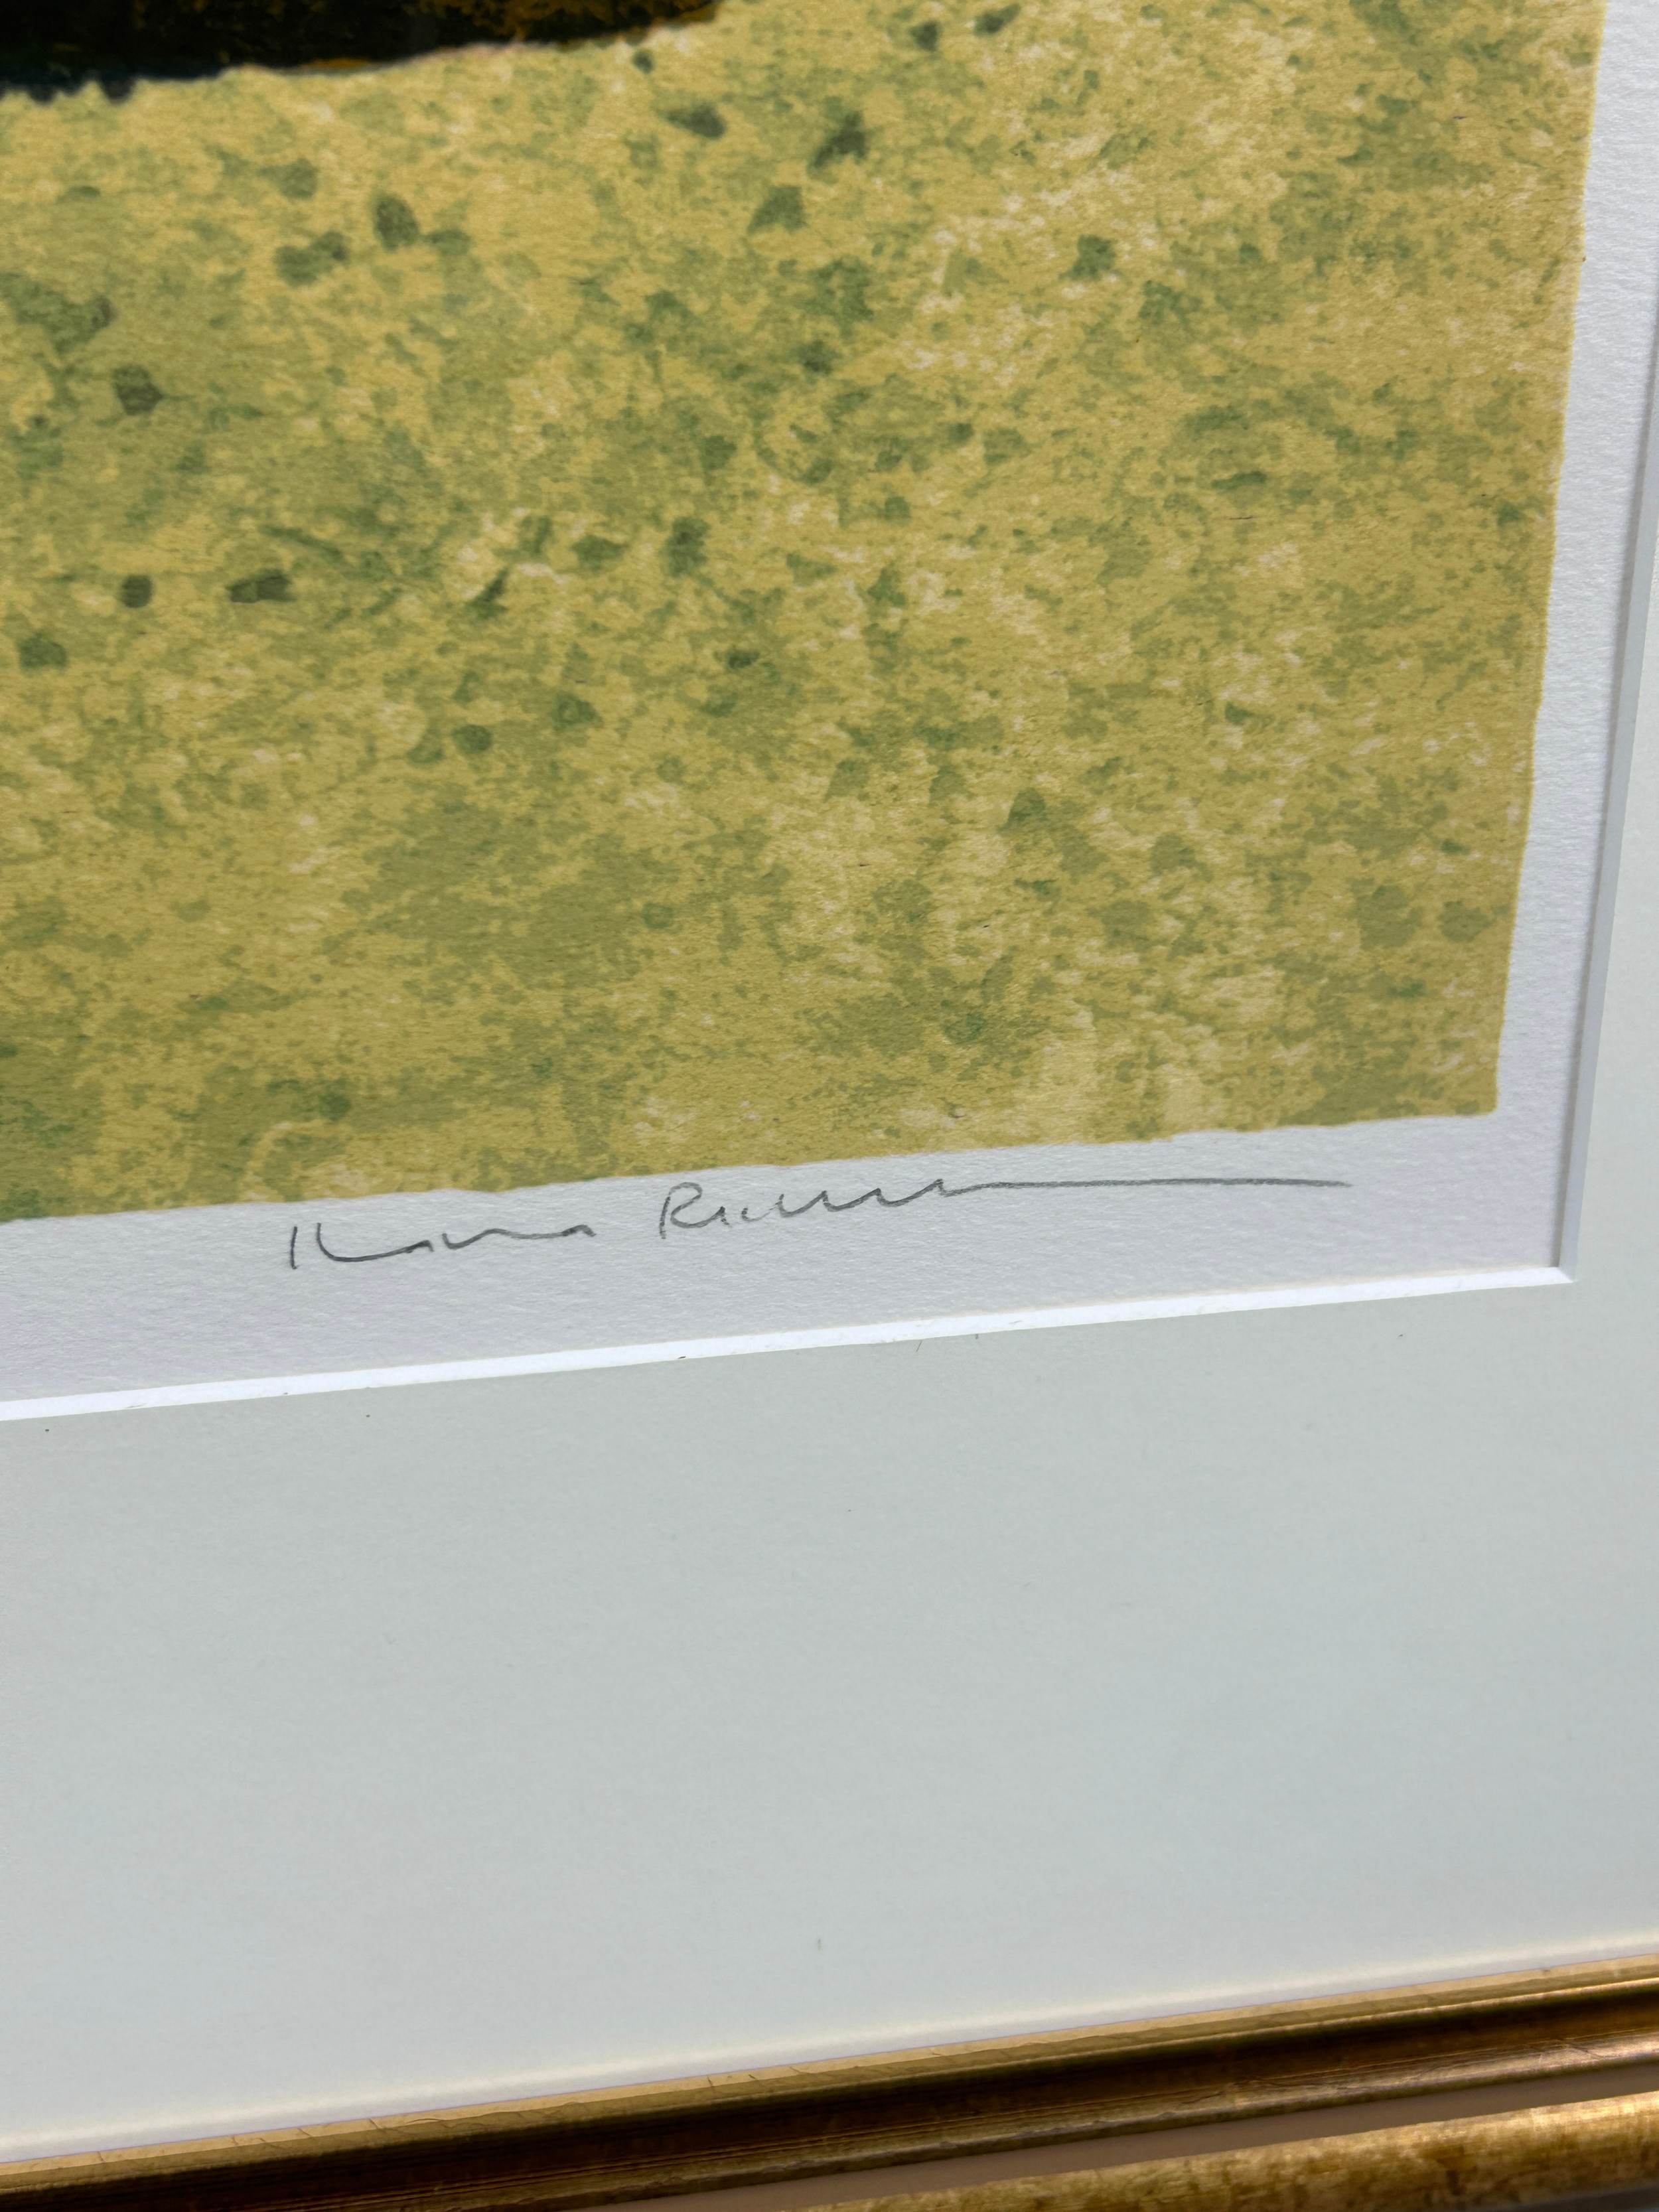 ILANA RICHARDSON: TWO LITHOGRAPHS 'HOT SHADOWS' 'VILLA' ARTISTS PROOFS (2), Each mounted in frames - Image 2 of 5